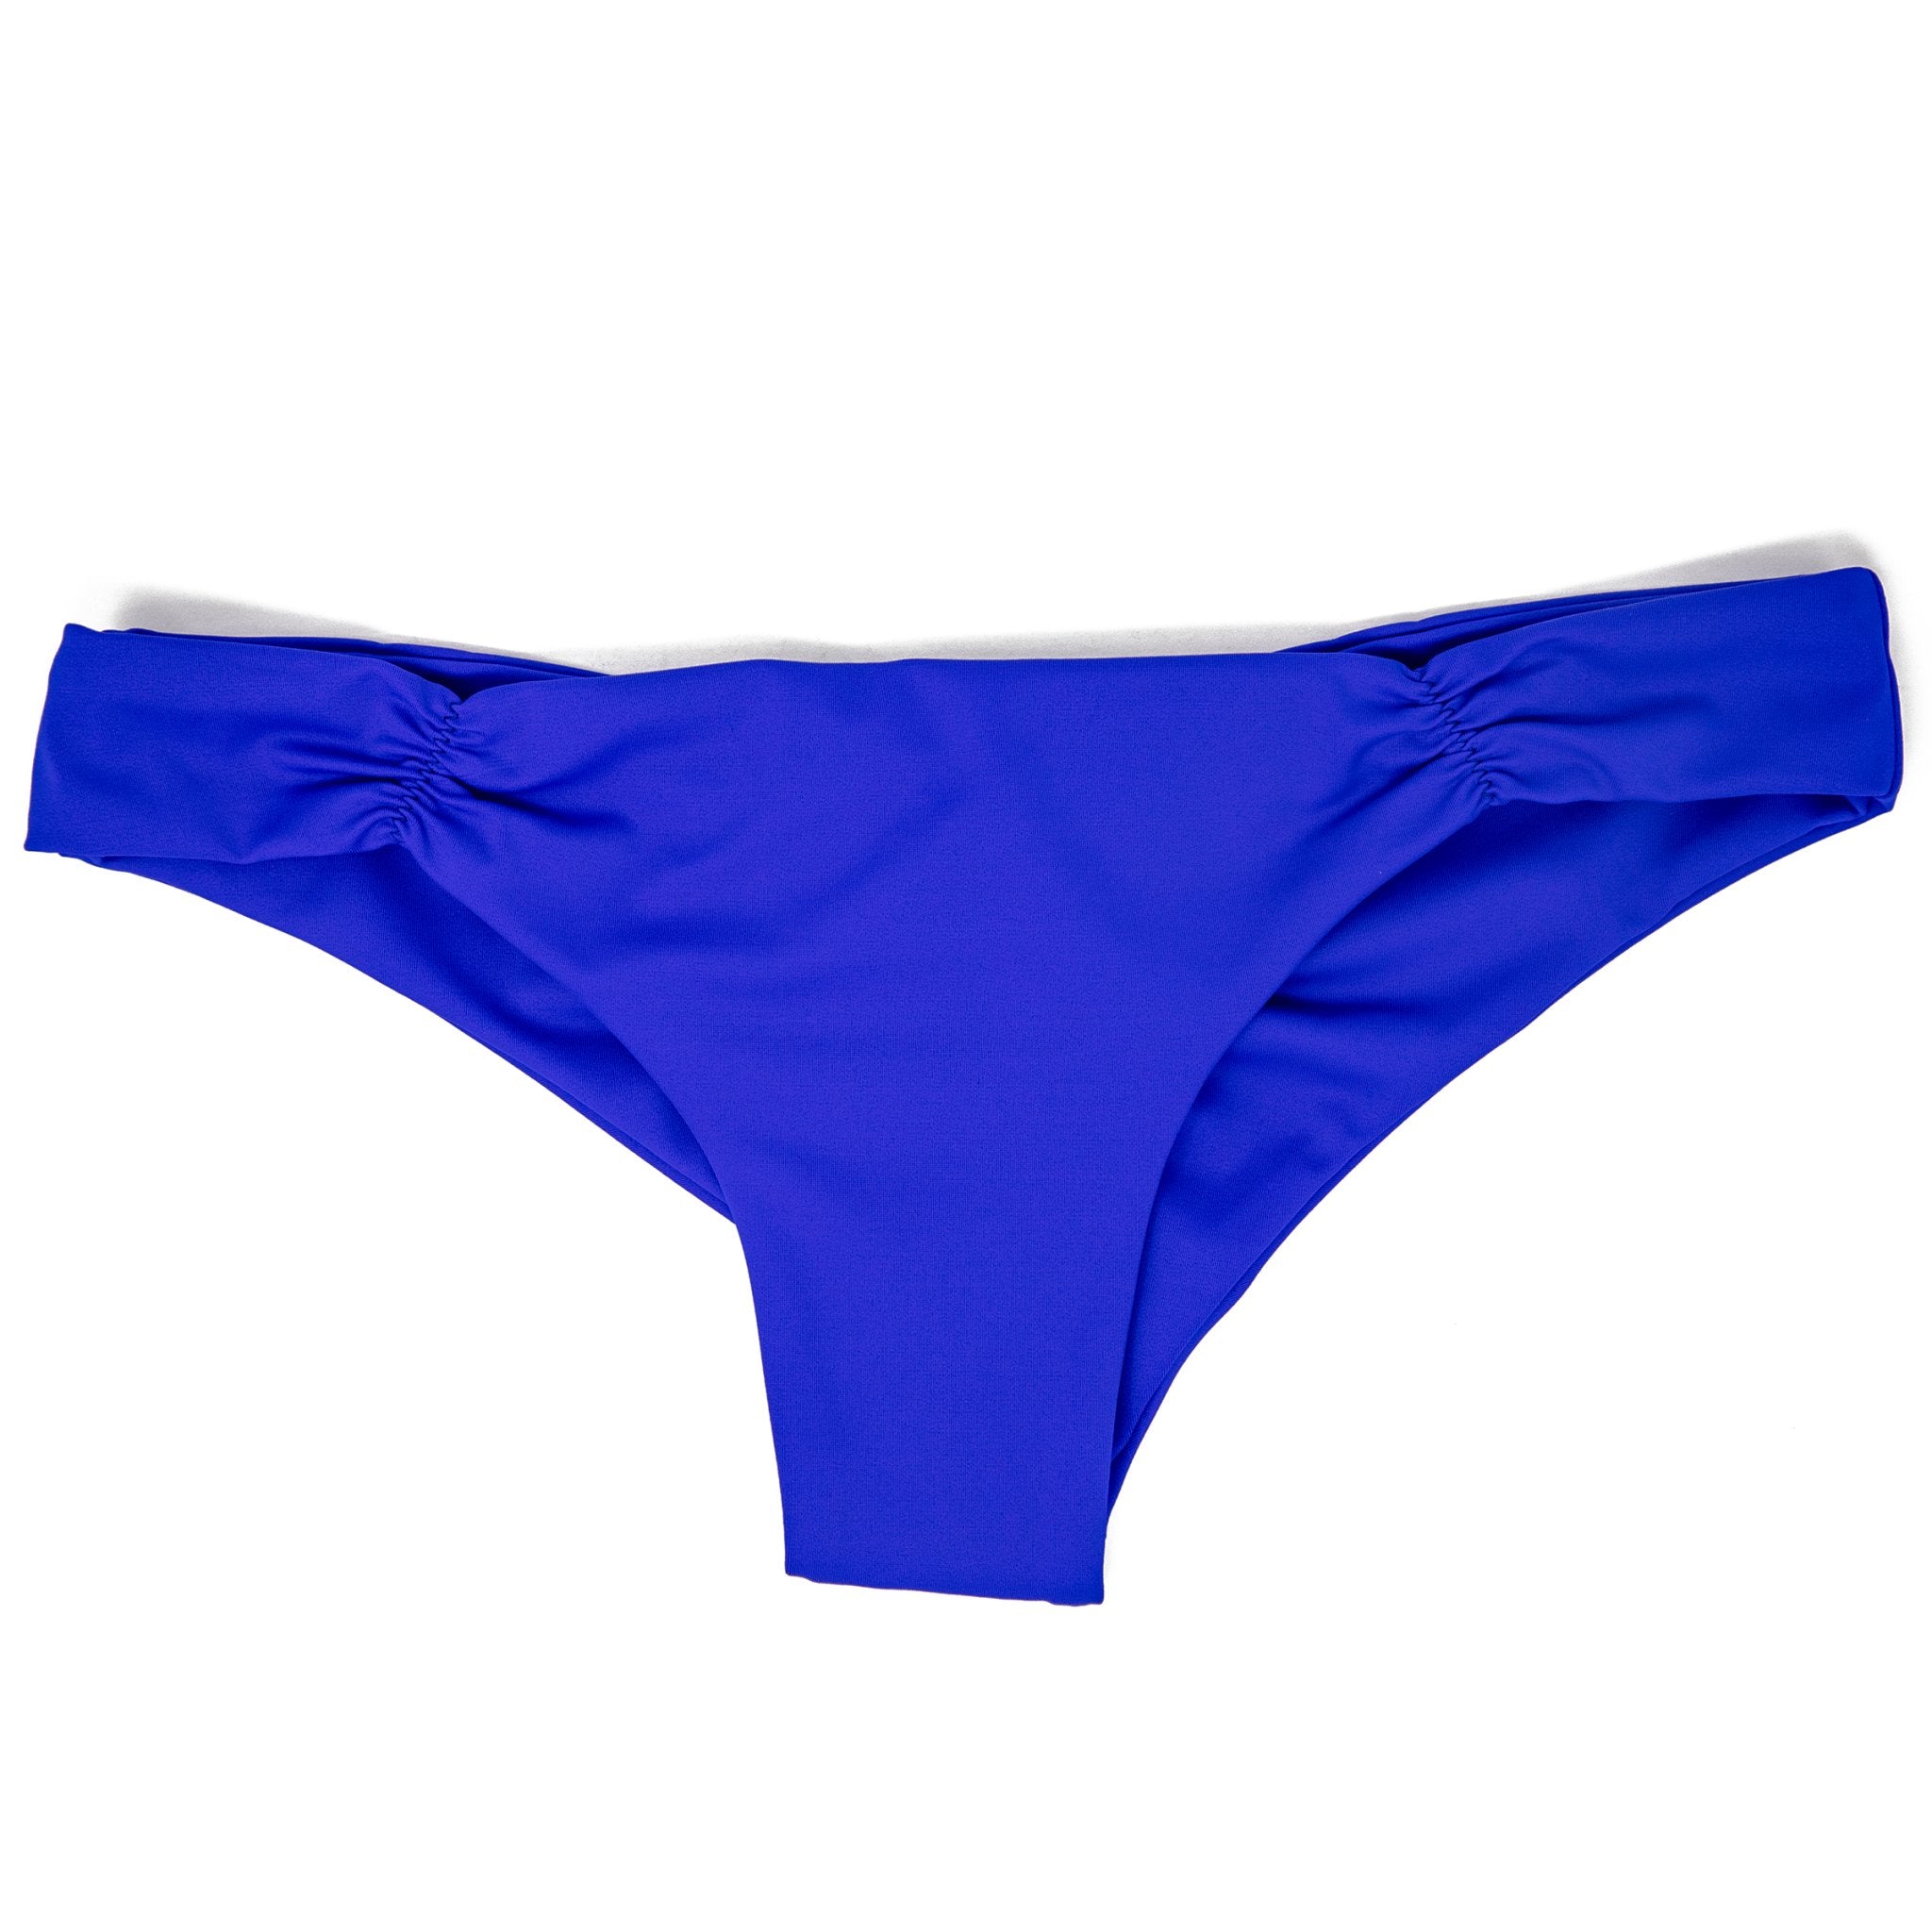 Esther Williams Retro High Waisted Solid Two-Piece Swimsuit Bottom